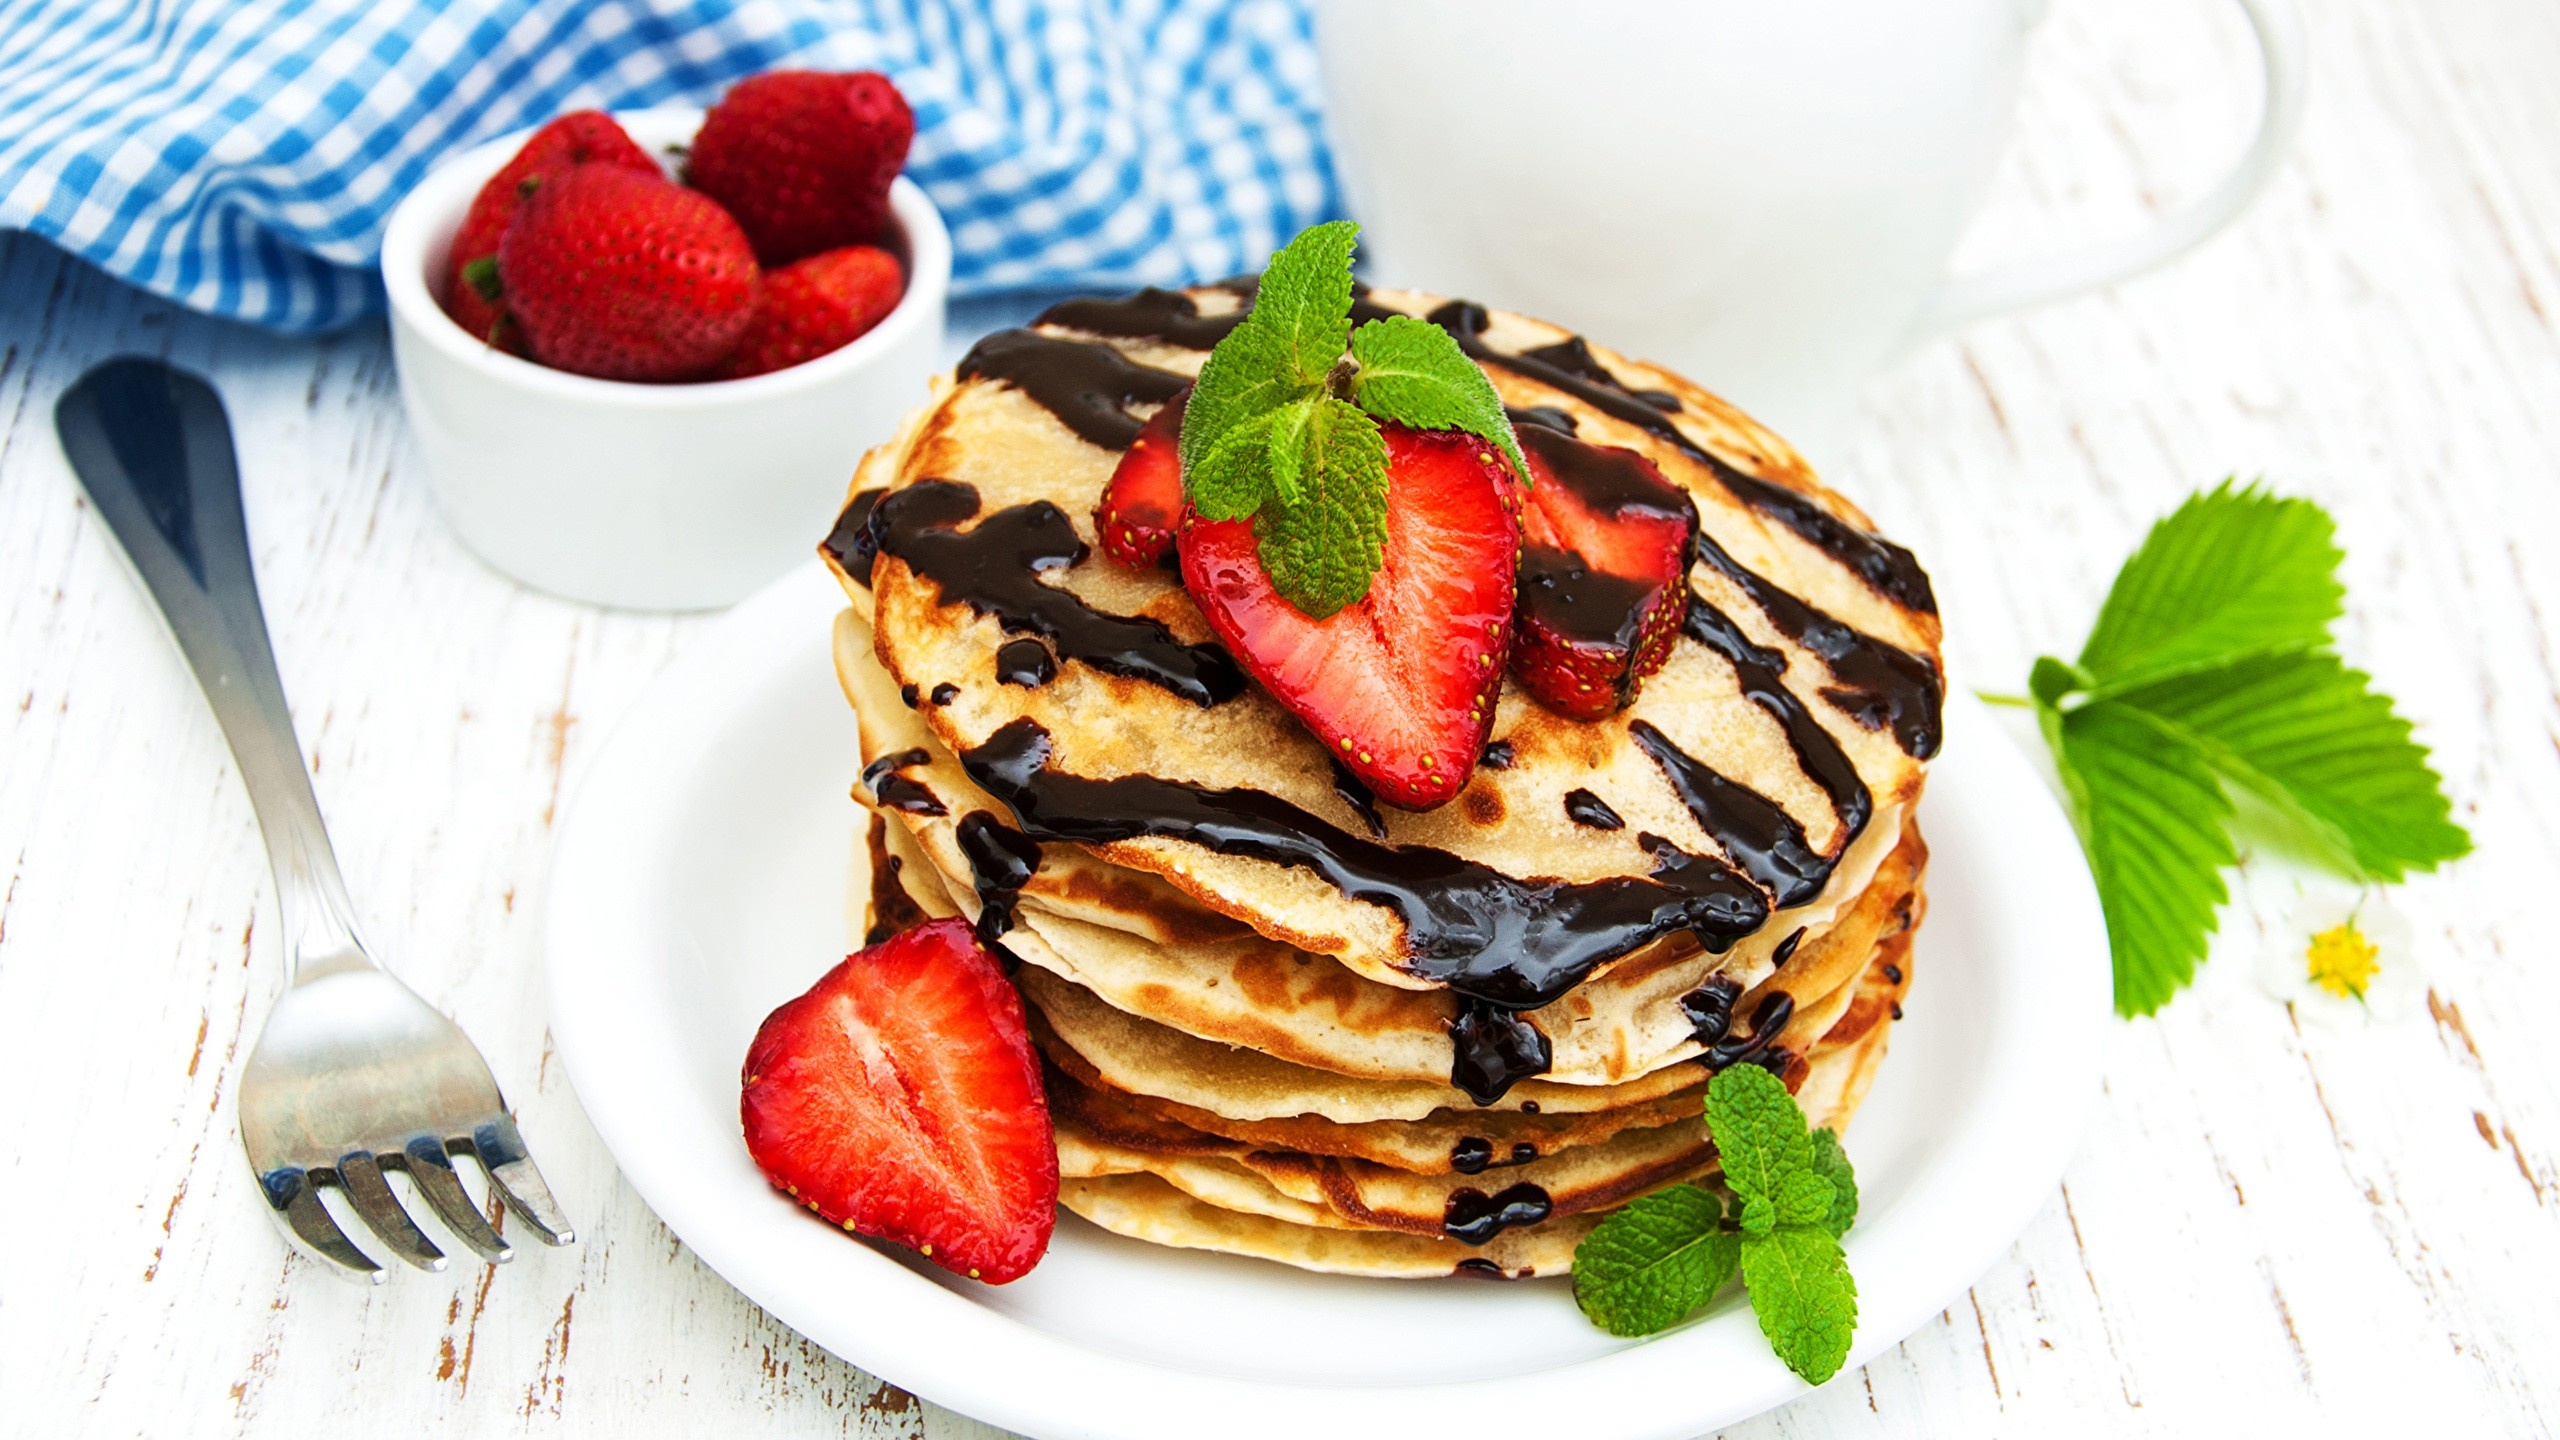 Pancake: Served with a variety of toppings and sauces. 2560x1440 HD Wallpaper.